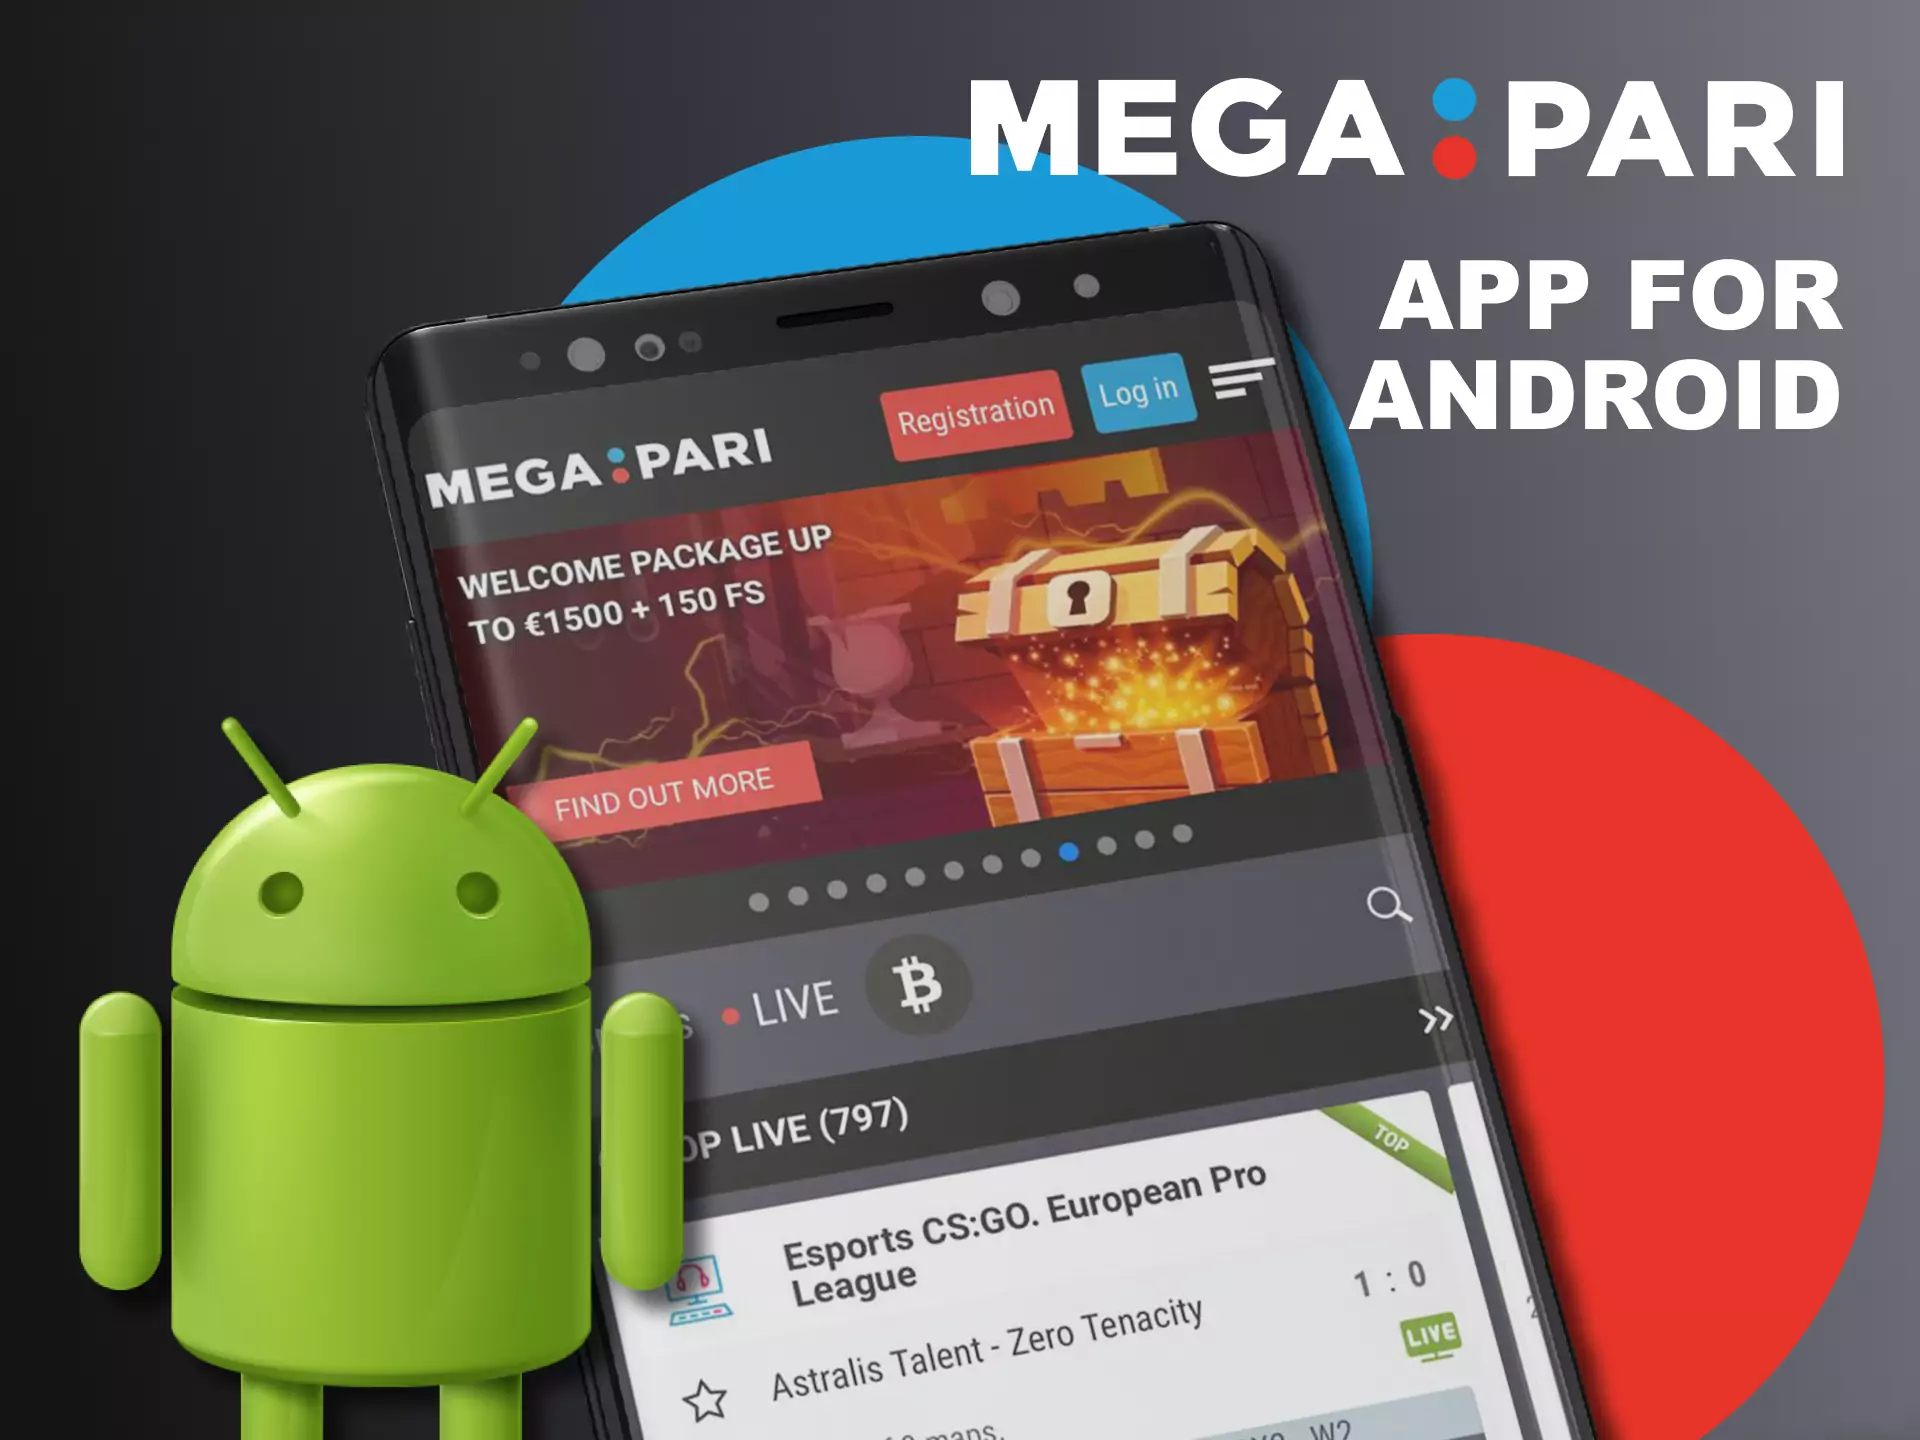 The Megapari app can be installed on your Android phone.